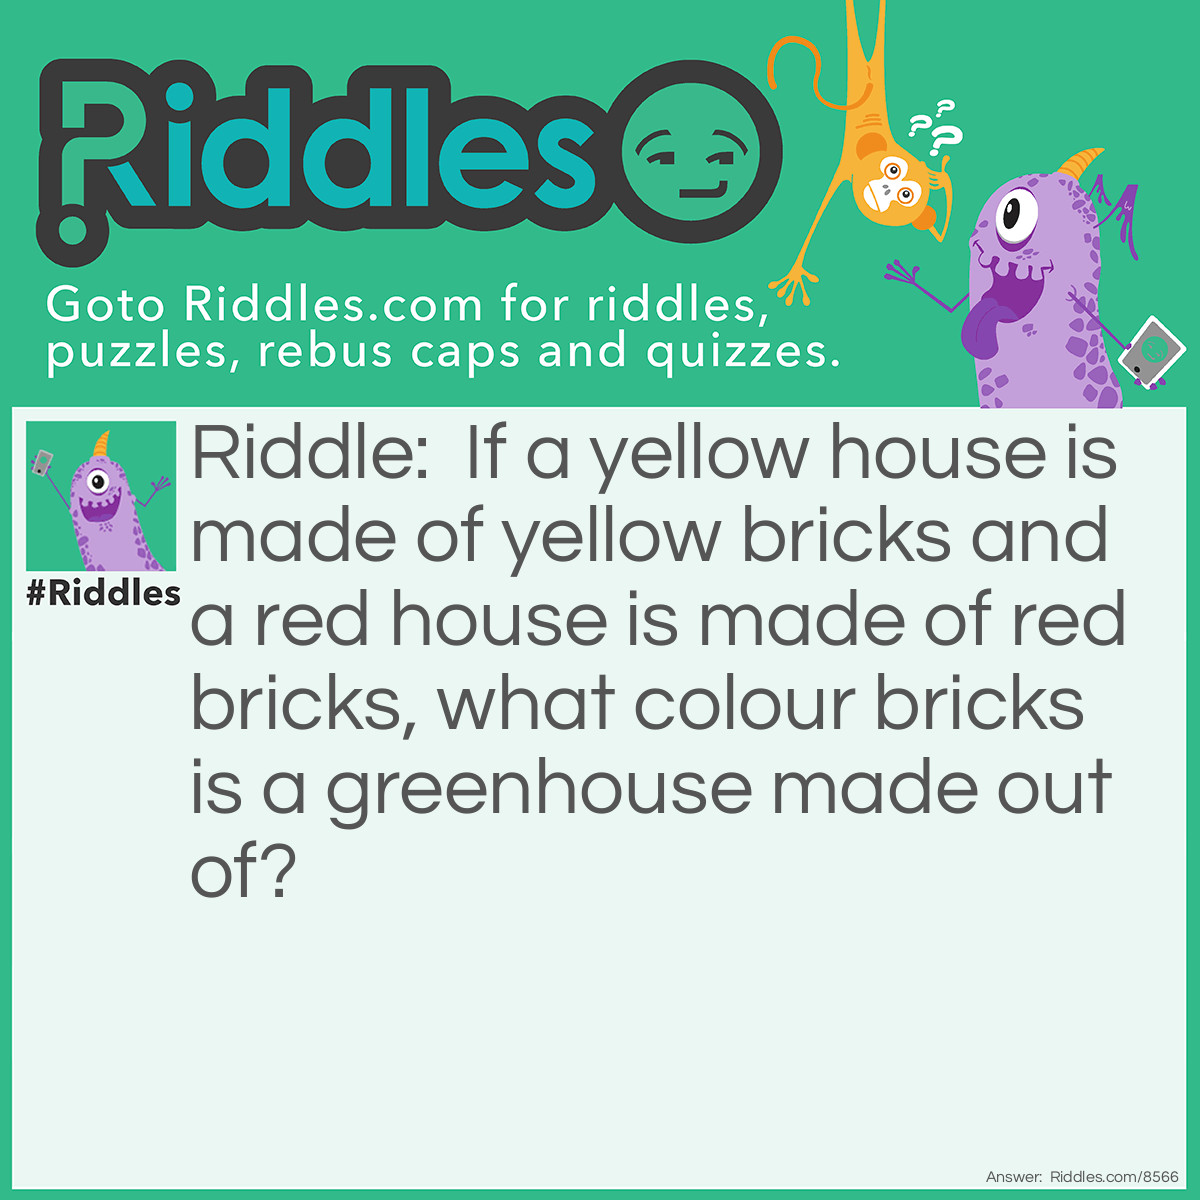 Riddle: If a yellow house is made of yellow bricks and a red house is made of red bricks, what colour bricks is a greenhouse made out of? Answer: A greenhouse is made of glass.